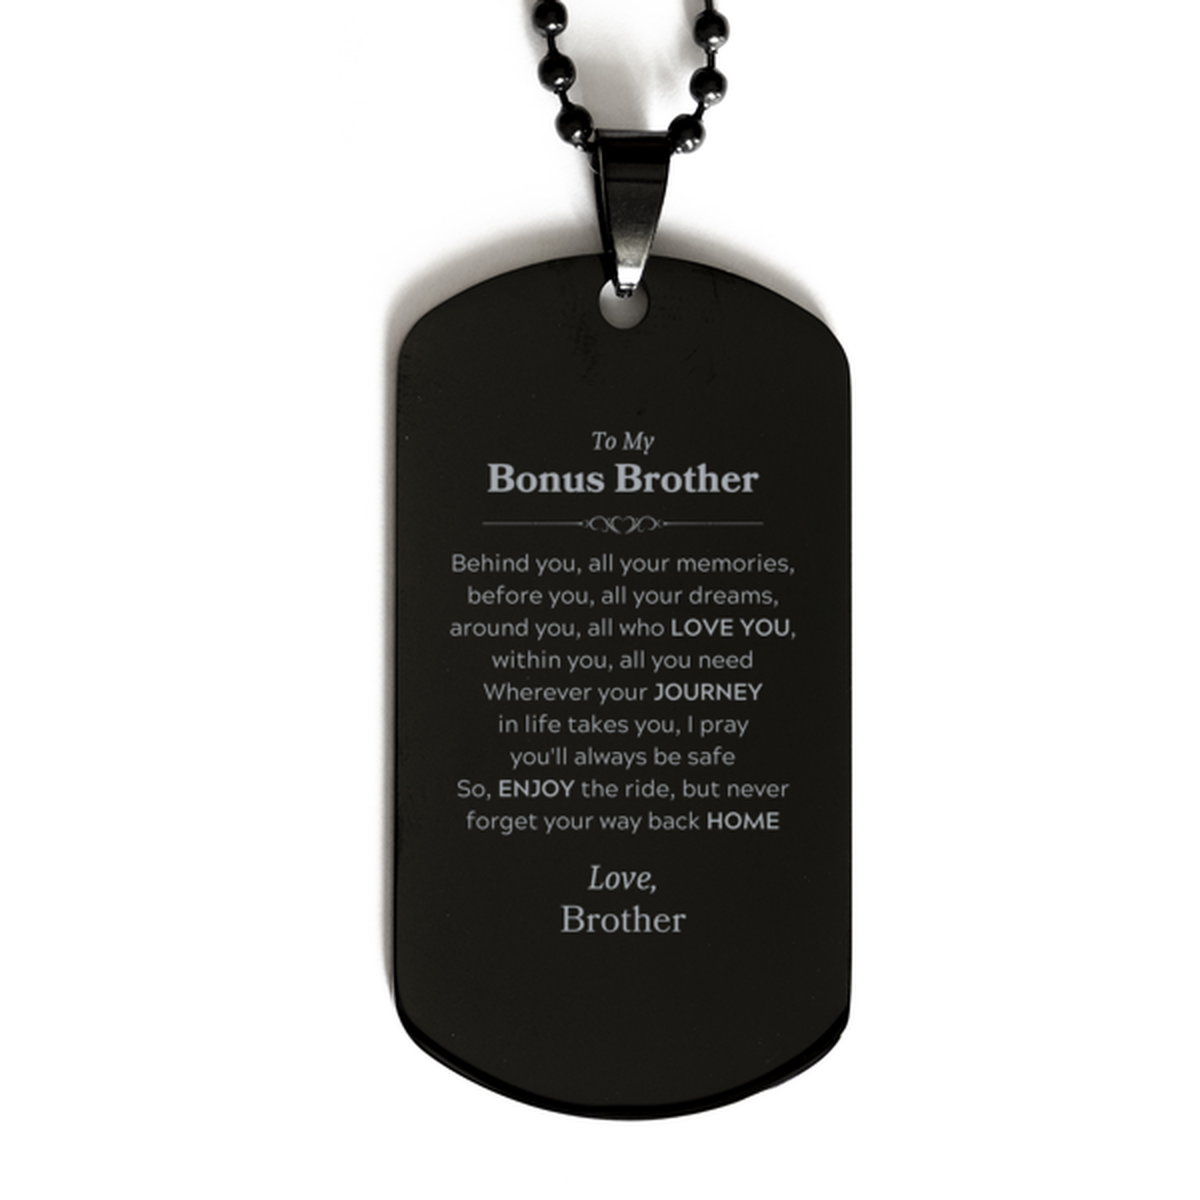 To My Bonus Brother Graduation Gifts from Brother, Bonus Brother Black Dog Tag Christmas Birthday Gifts for Bonus Brother Behind you, all your memories, before you, all your dreams. Love, Brother